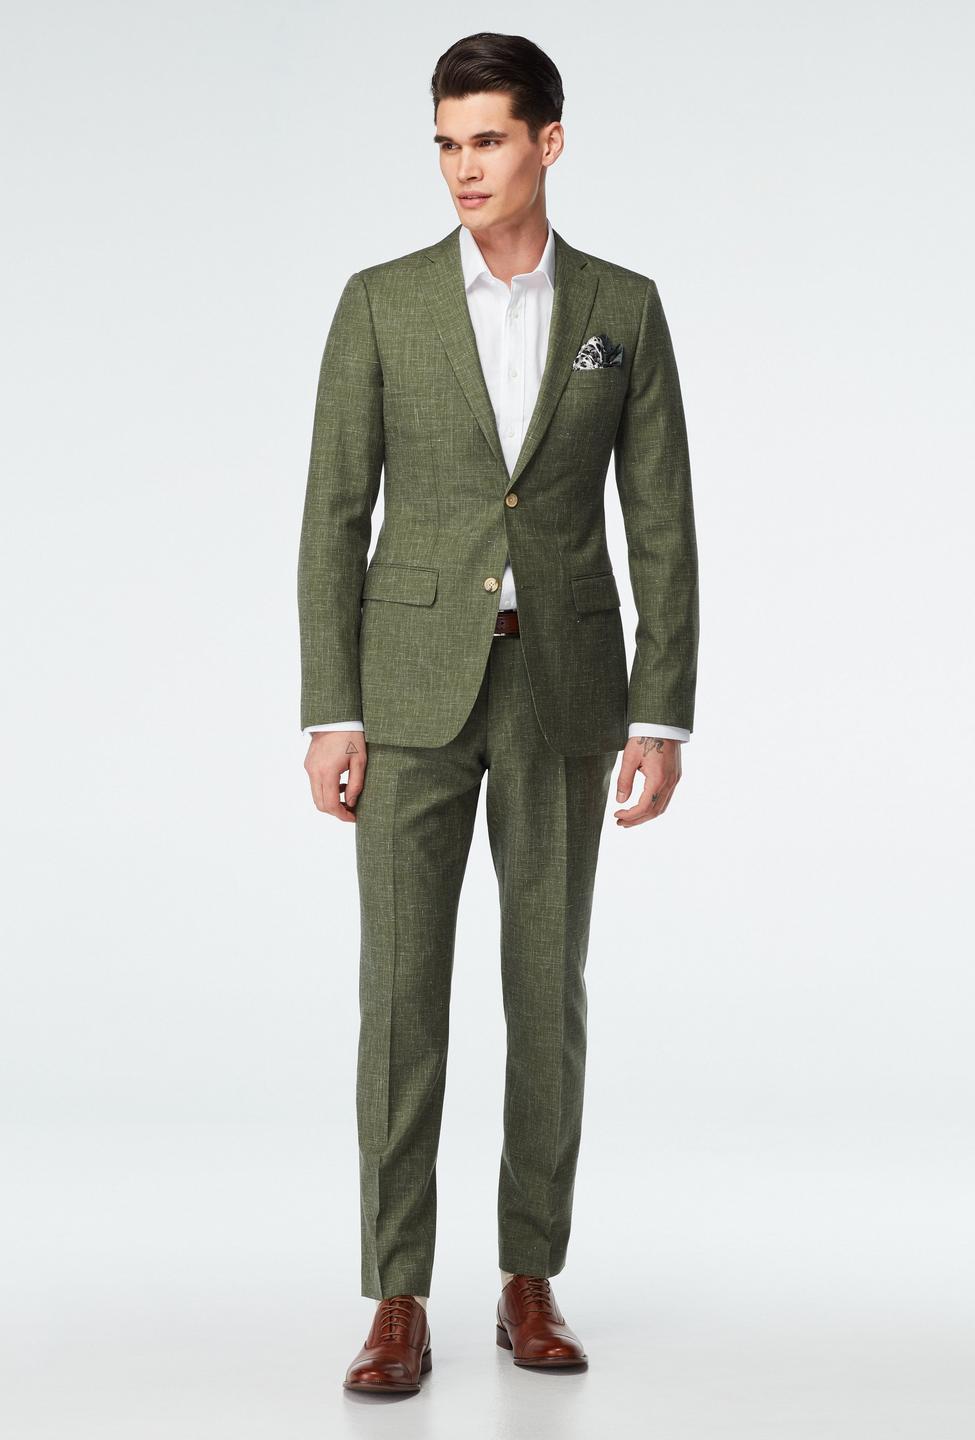 Green suit - Stockport Solid Design from Seasonal Indochino Collection